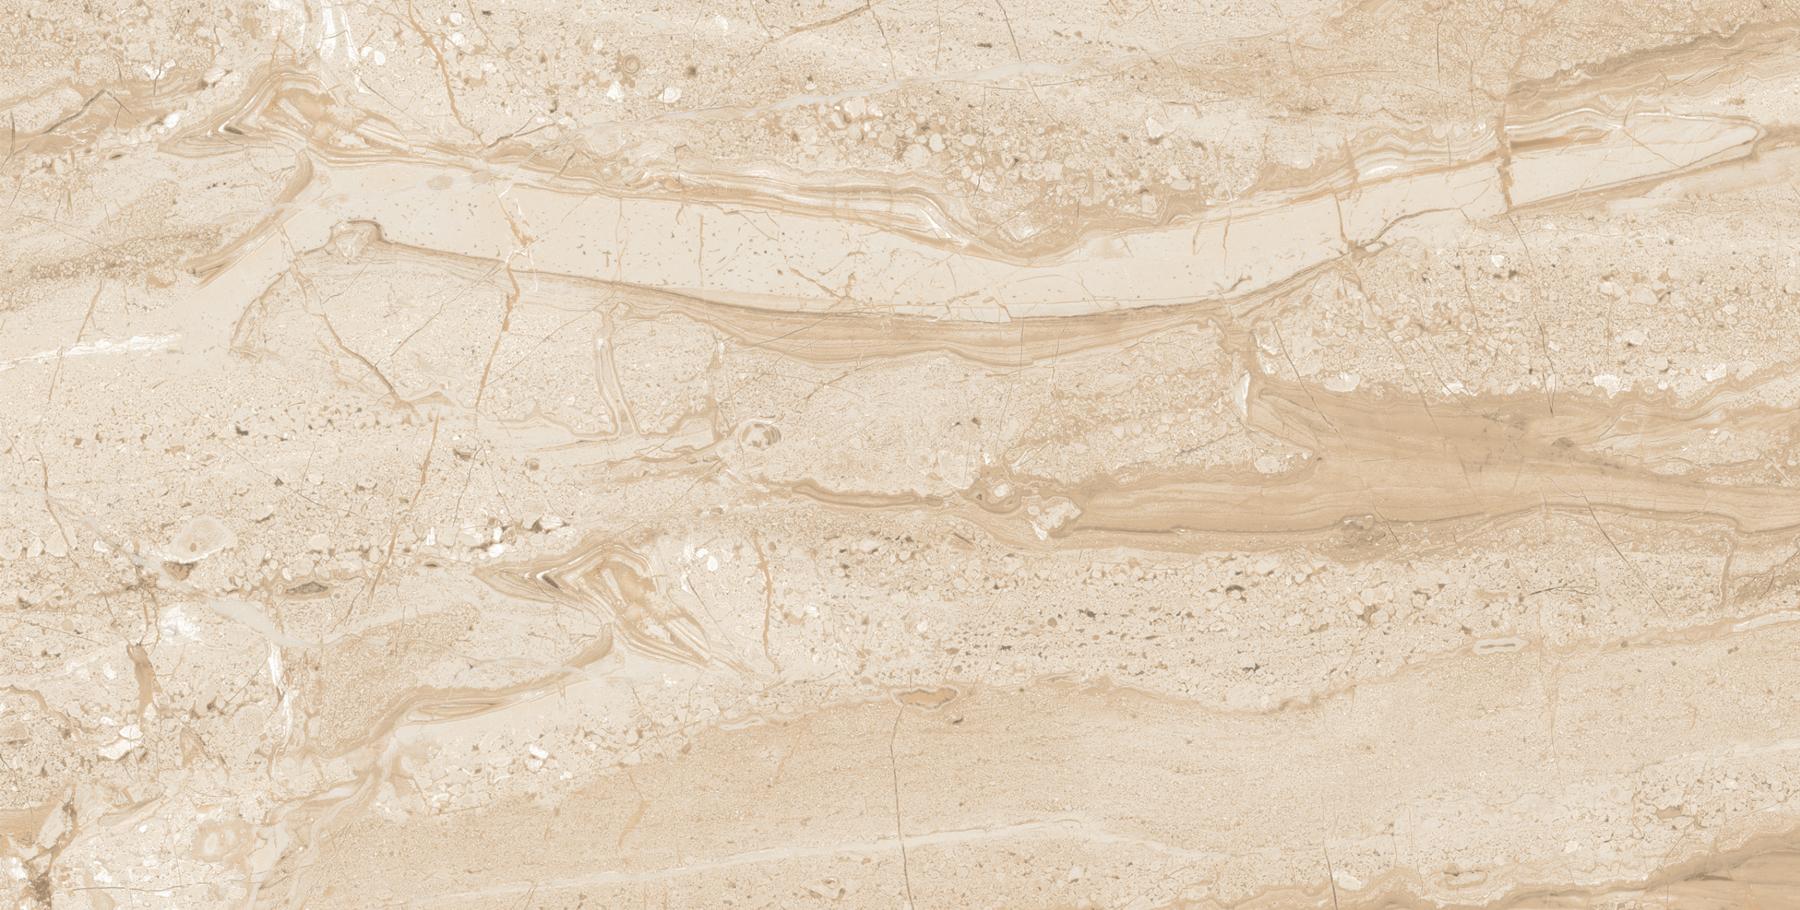 Brown Marble Tiles for Bathroom Tiles, Living Room Tiles, Bedroom Tiles, Commercial Tiles, Accent Tiles, Office Tiles, Bar Tiles, Restaurant Tiles, Hospital Tiles, High Traffic Tiles, Bar/Restaurant, Commercial/Office, Outdoor Area